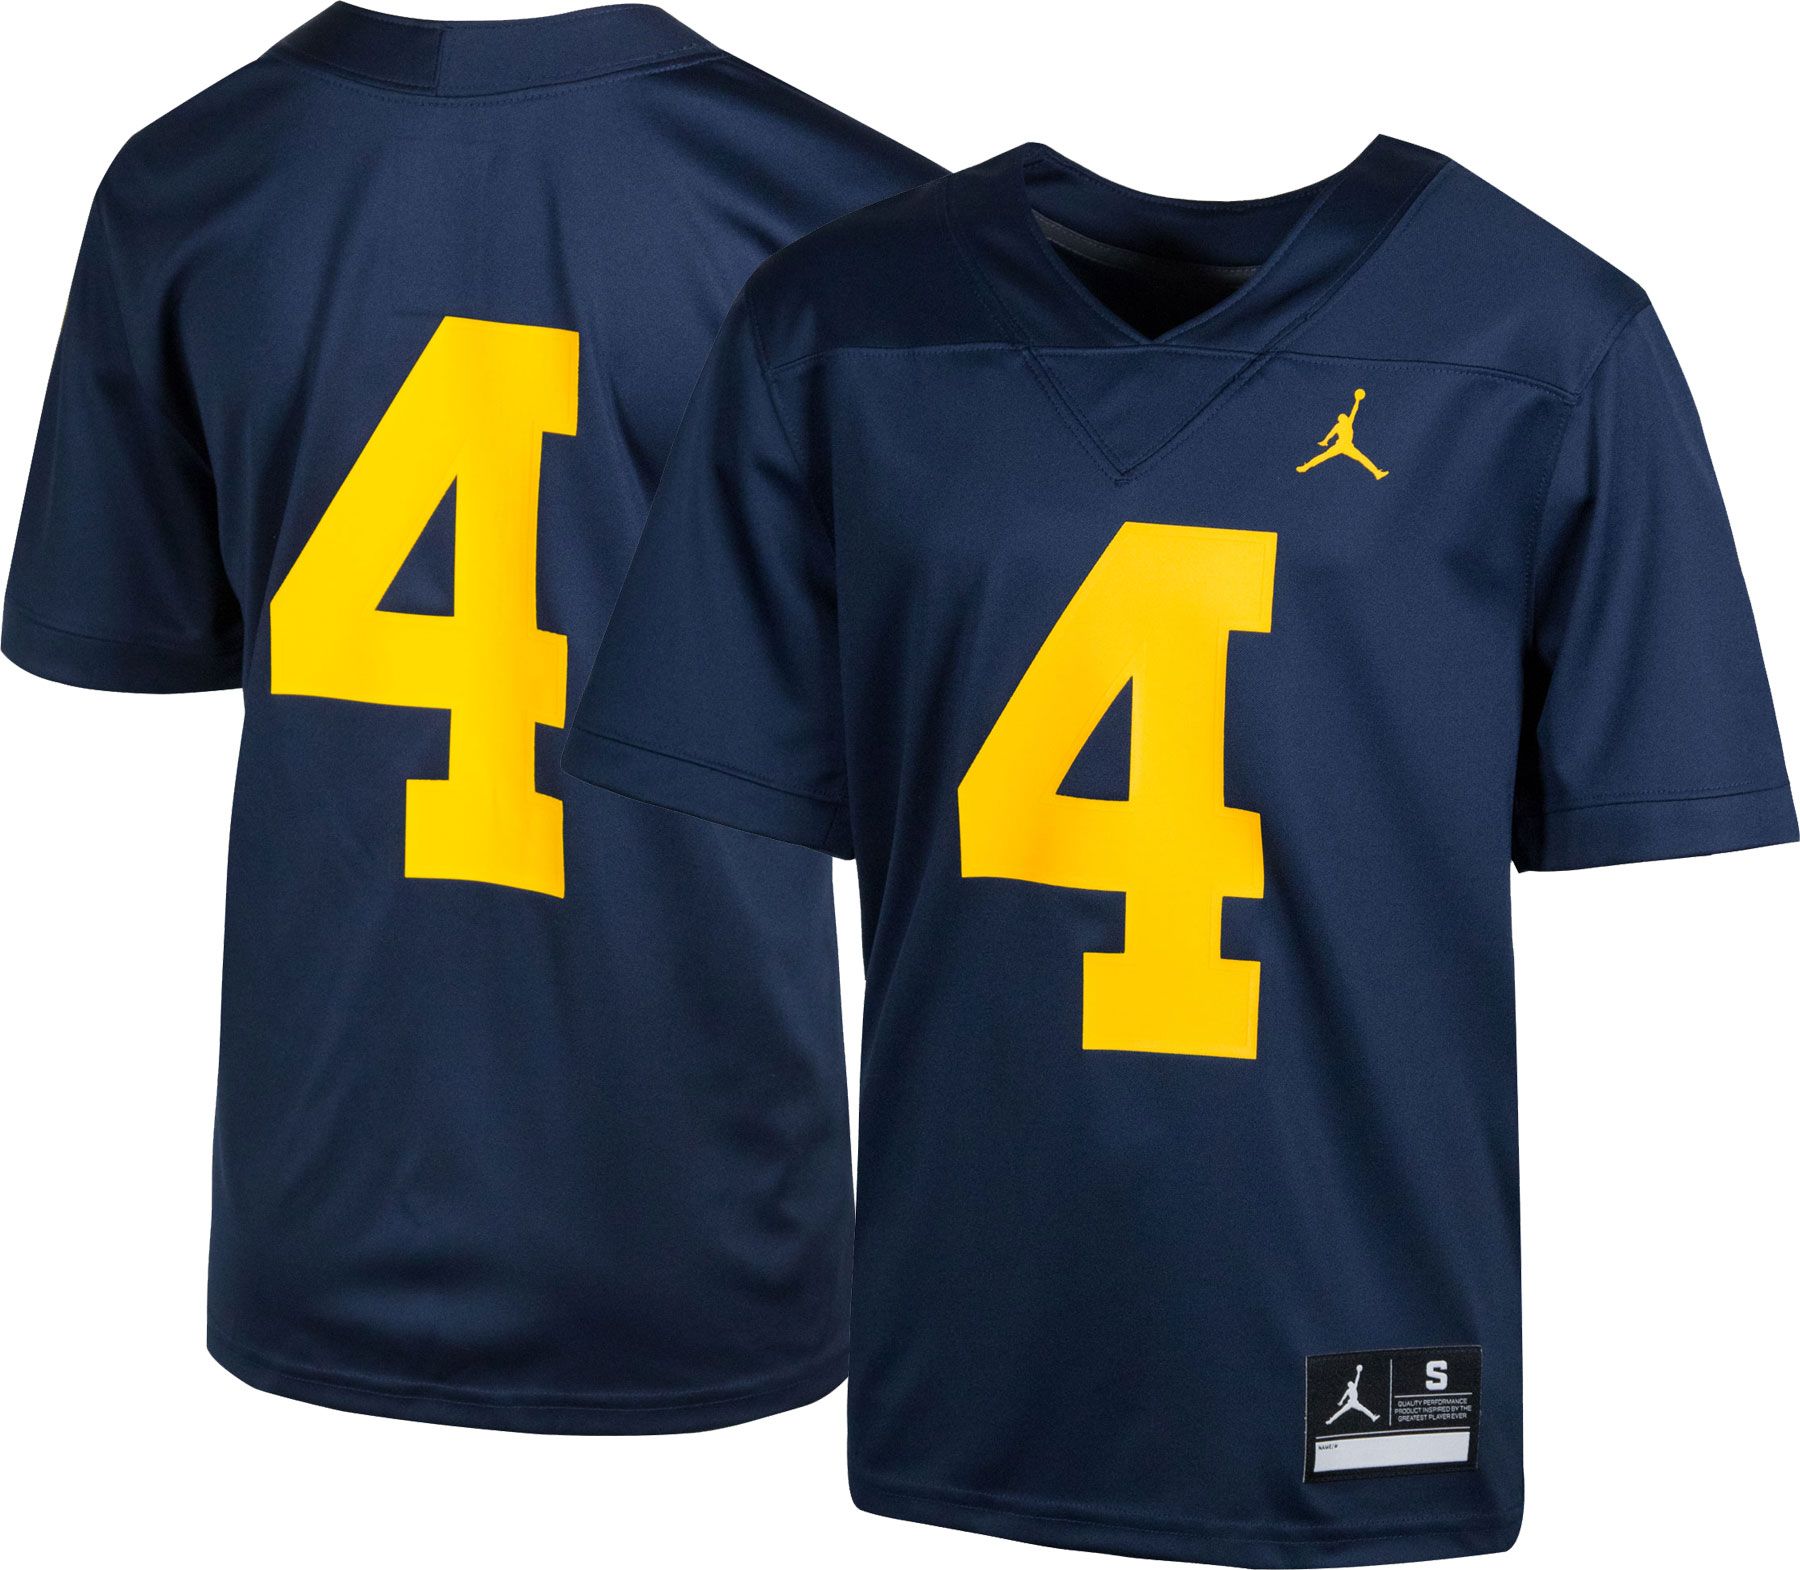 Nike Youth Michigan Wolverines #4 Blue 